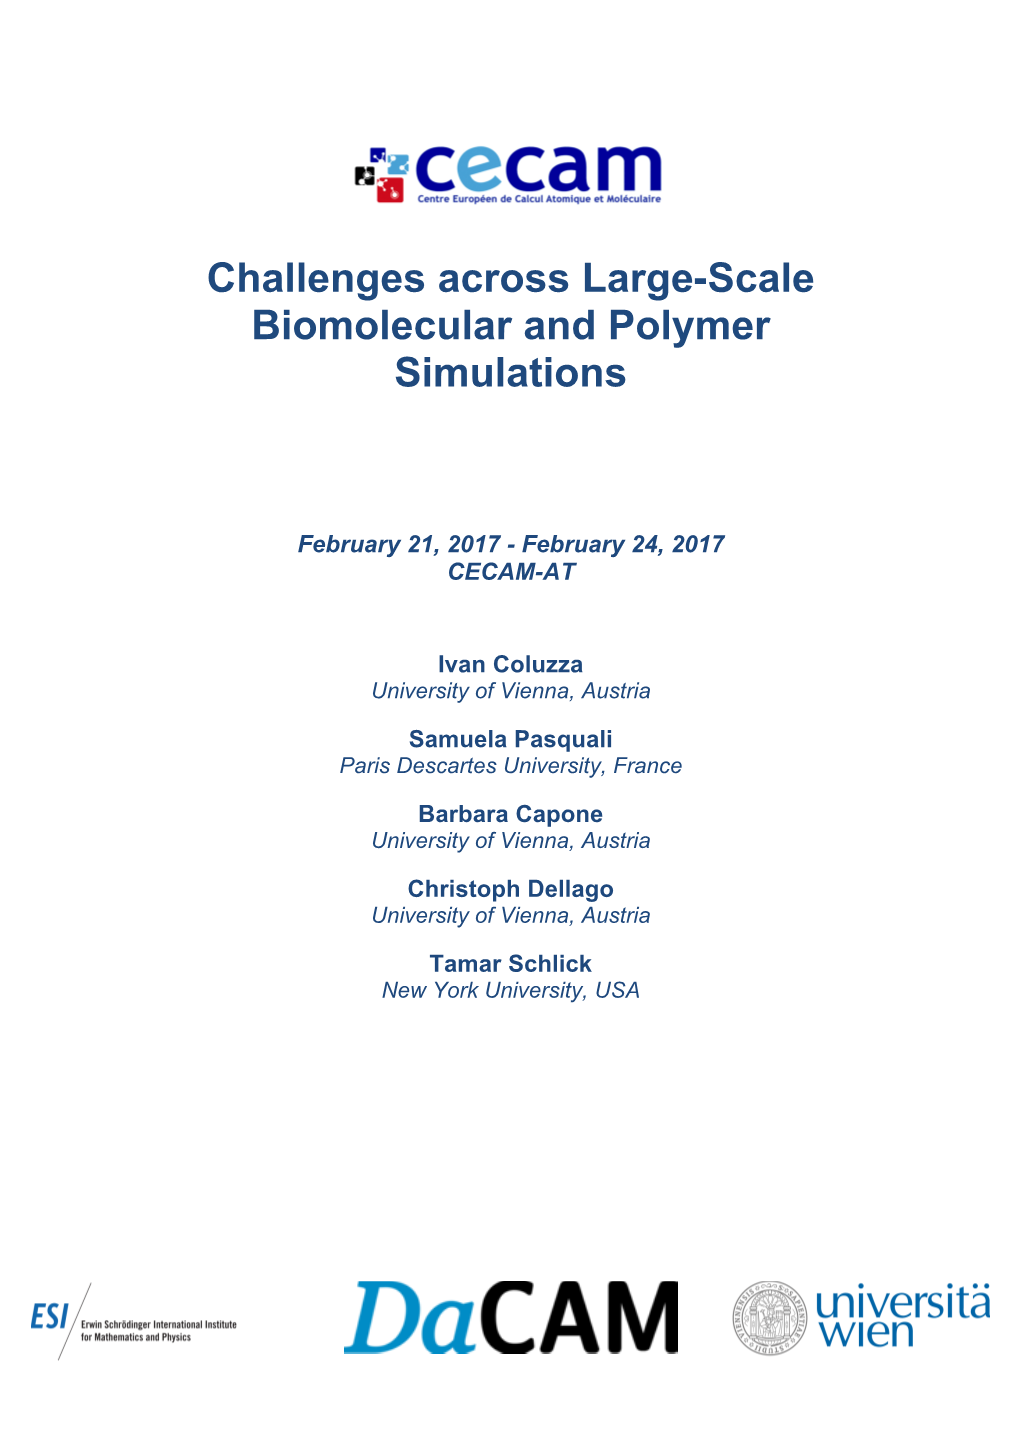 Challenges Across Large-Scale Biomolecular and Polymer Simulations